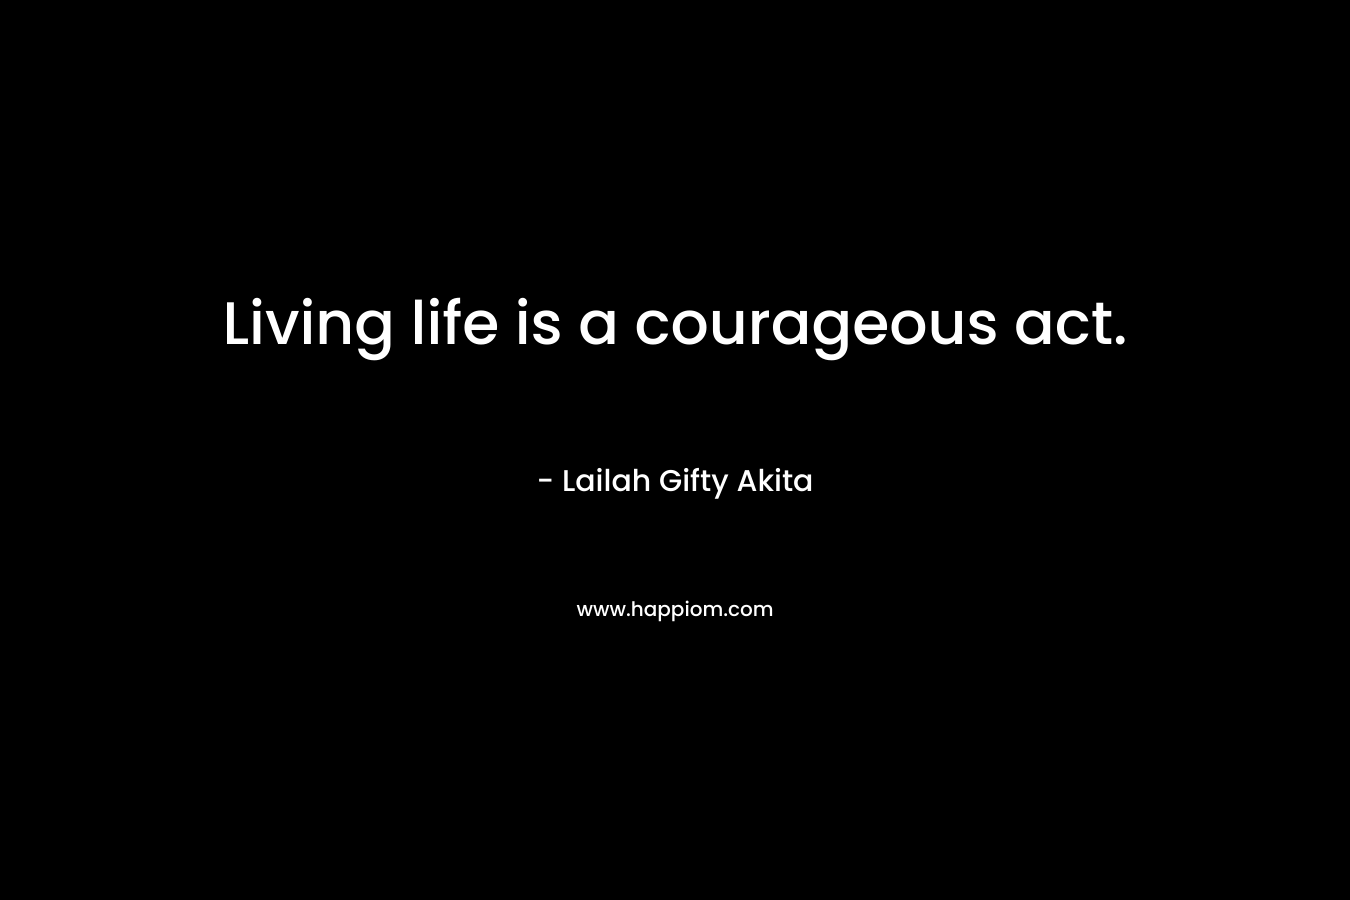 Living life is a courageous act.